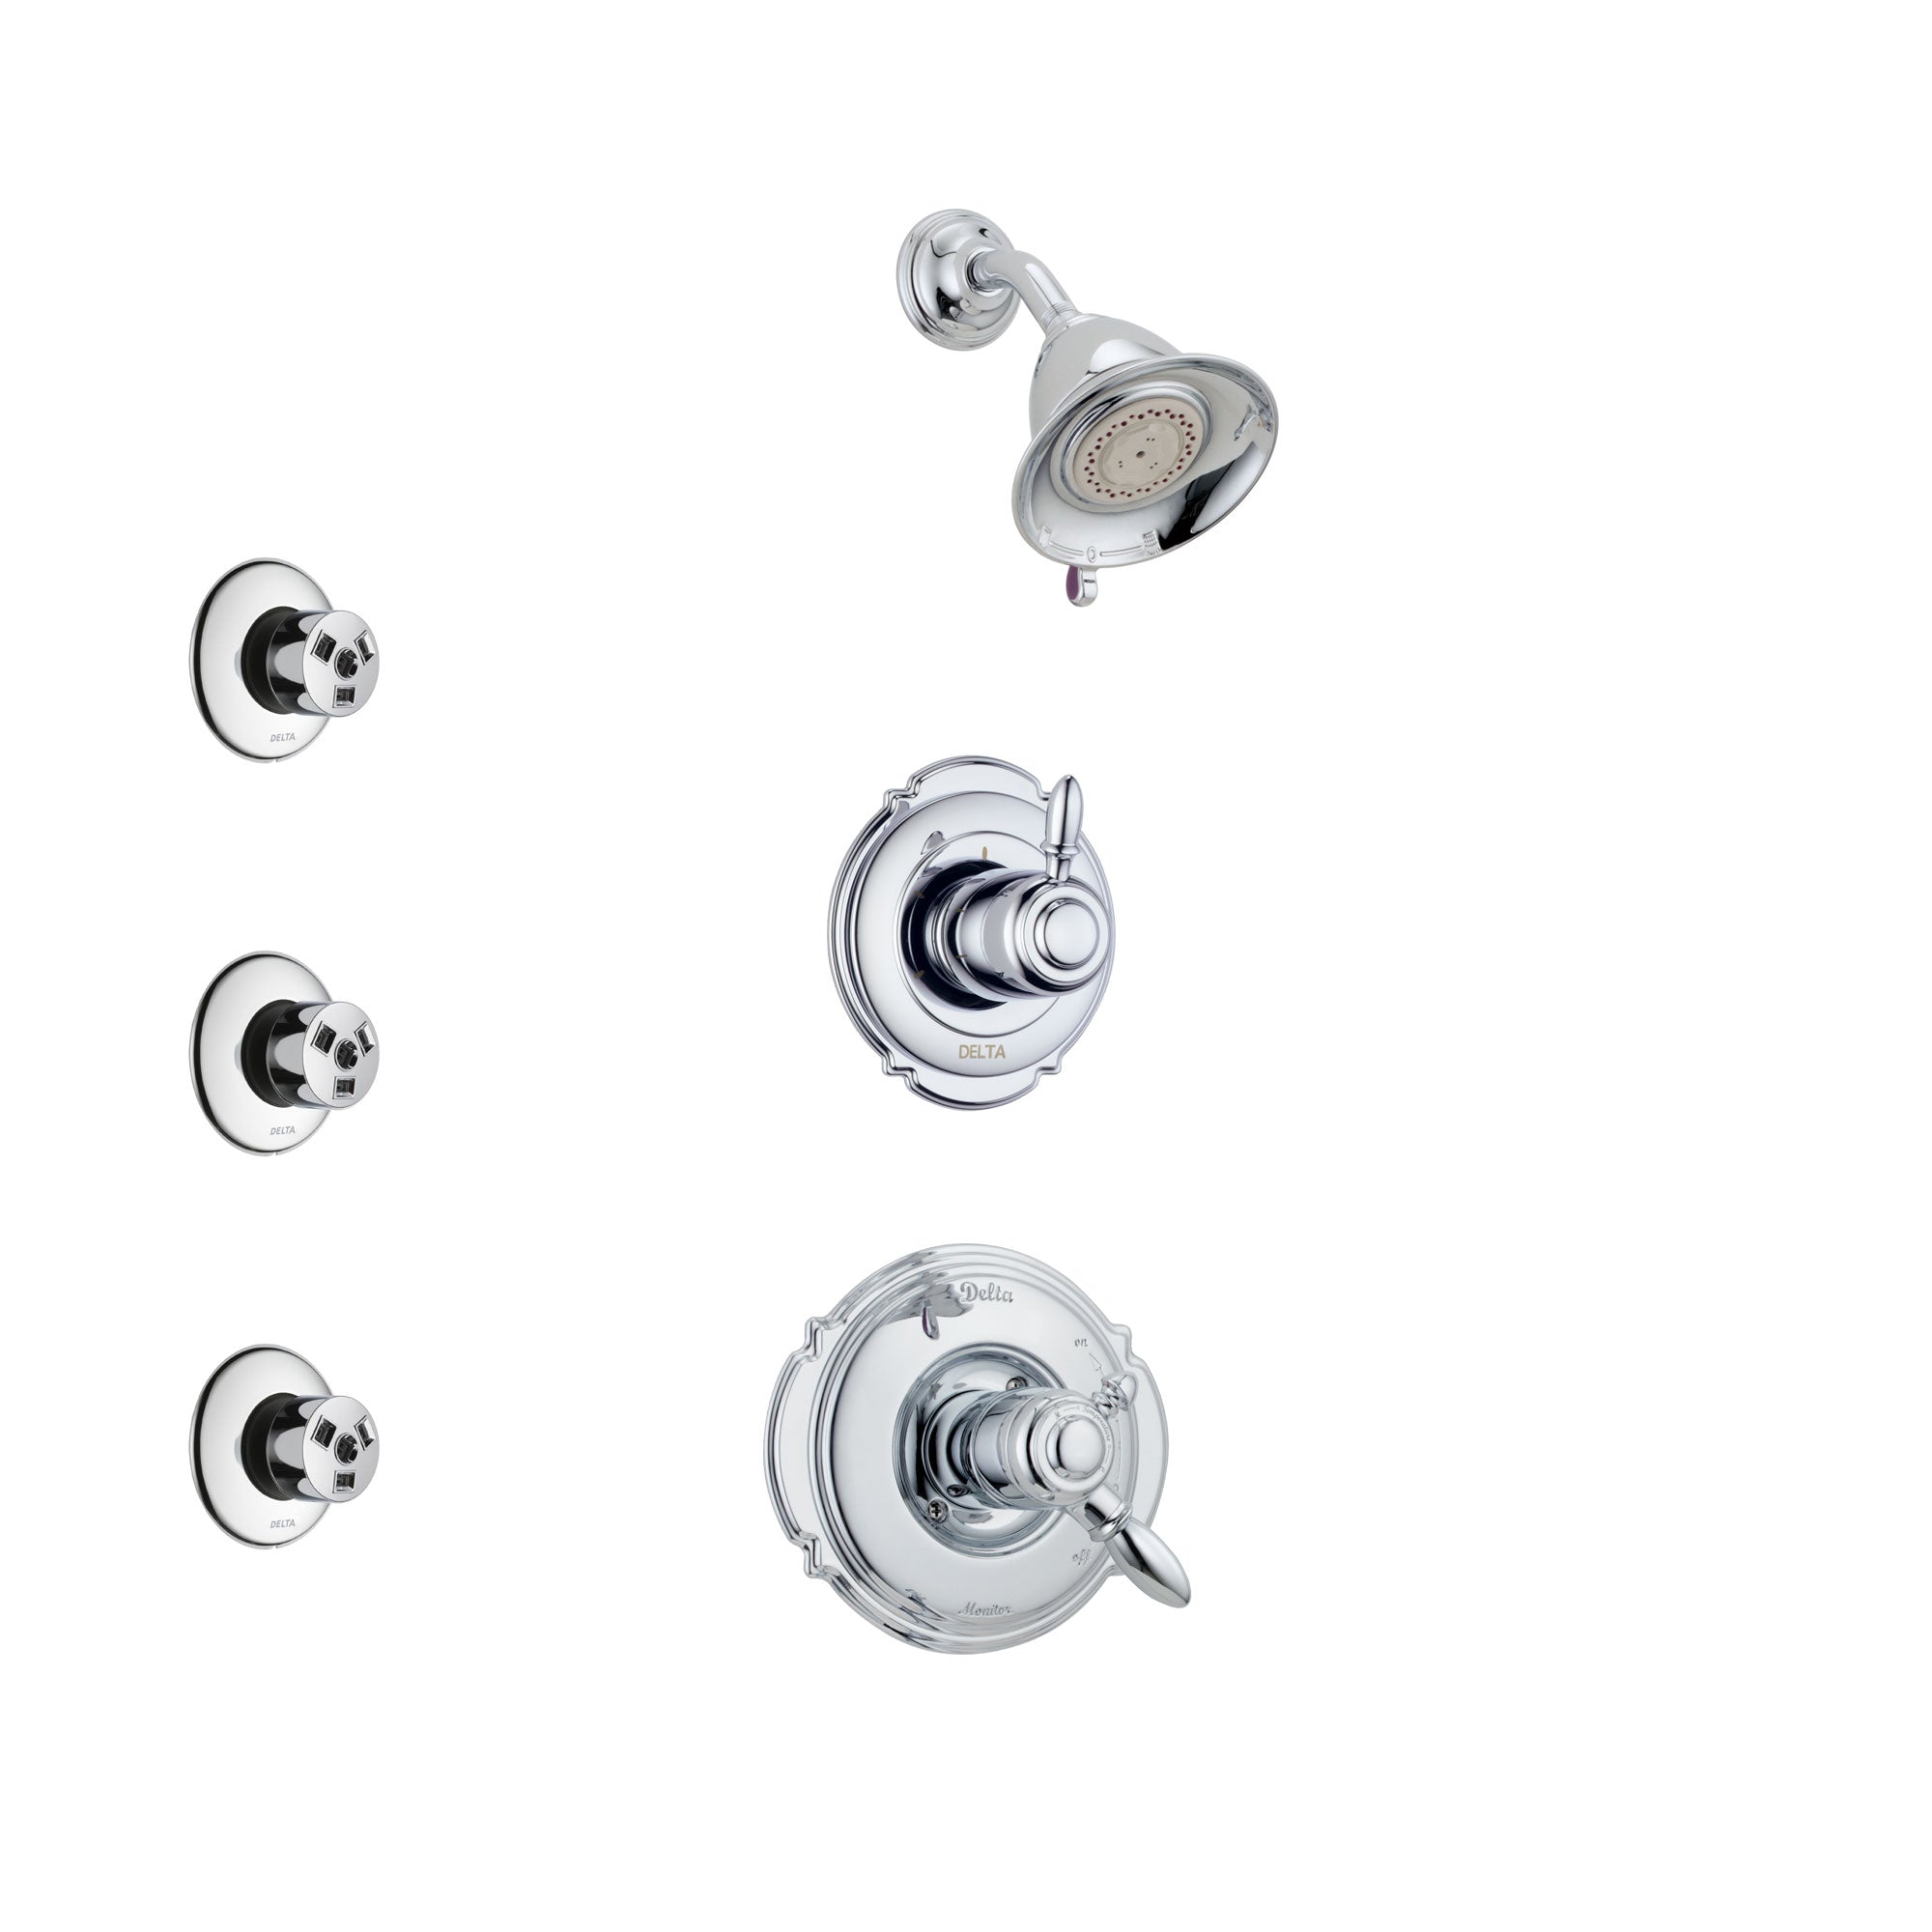 Delta Victorian Chrome Finish Shower System with Dual Control Handle, 3-Setting Diverter, Showerhead, and 3 Body Sprays SS1725512